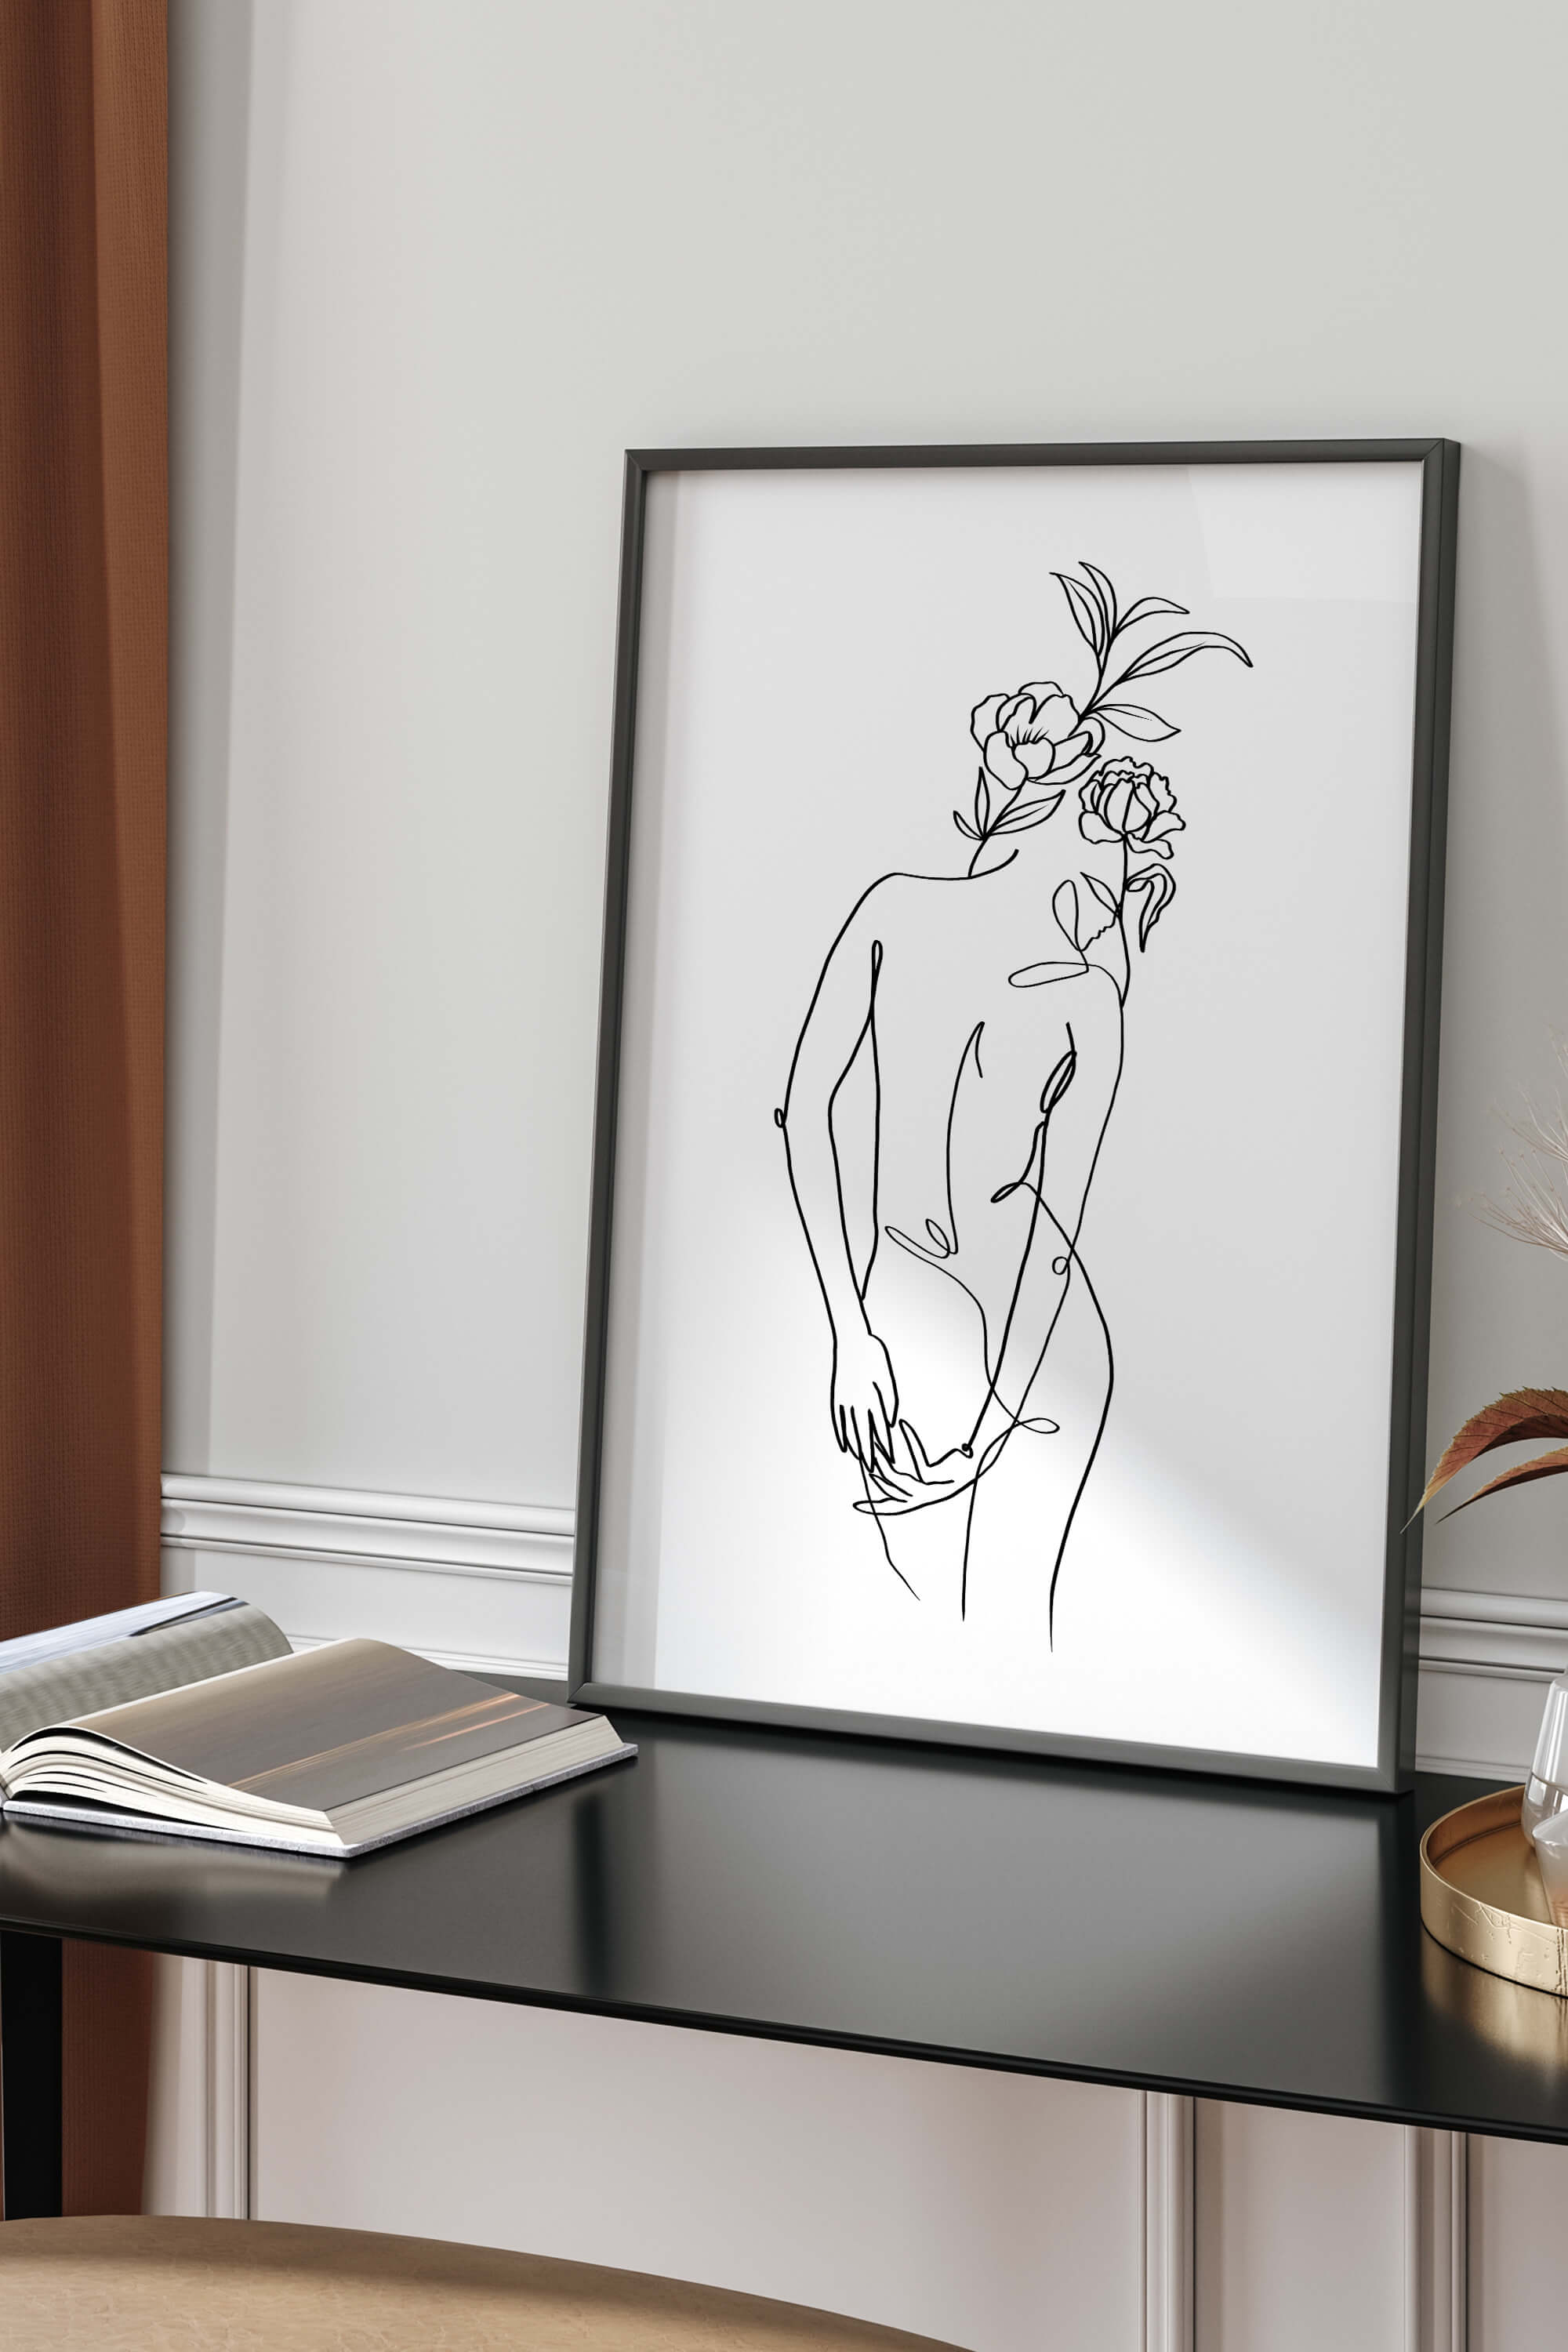 This art print combines monochrome elegance with cultural motifs, featuring a nude female form adorned with symbols inspired by diverse cultures. The intricate details celebrate cultural diversity, creating a visually rich and meaningful composition.